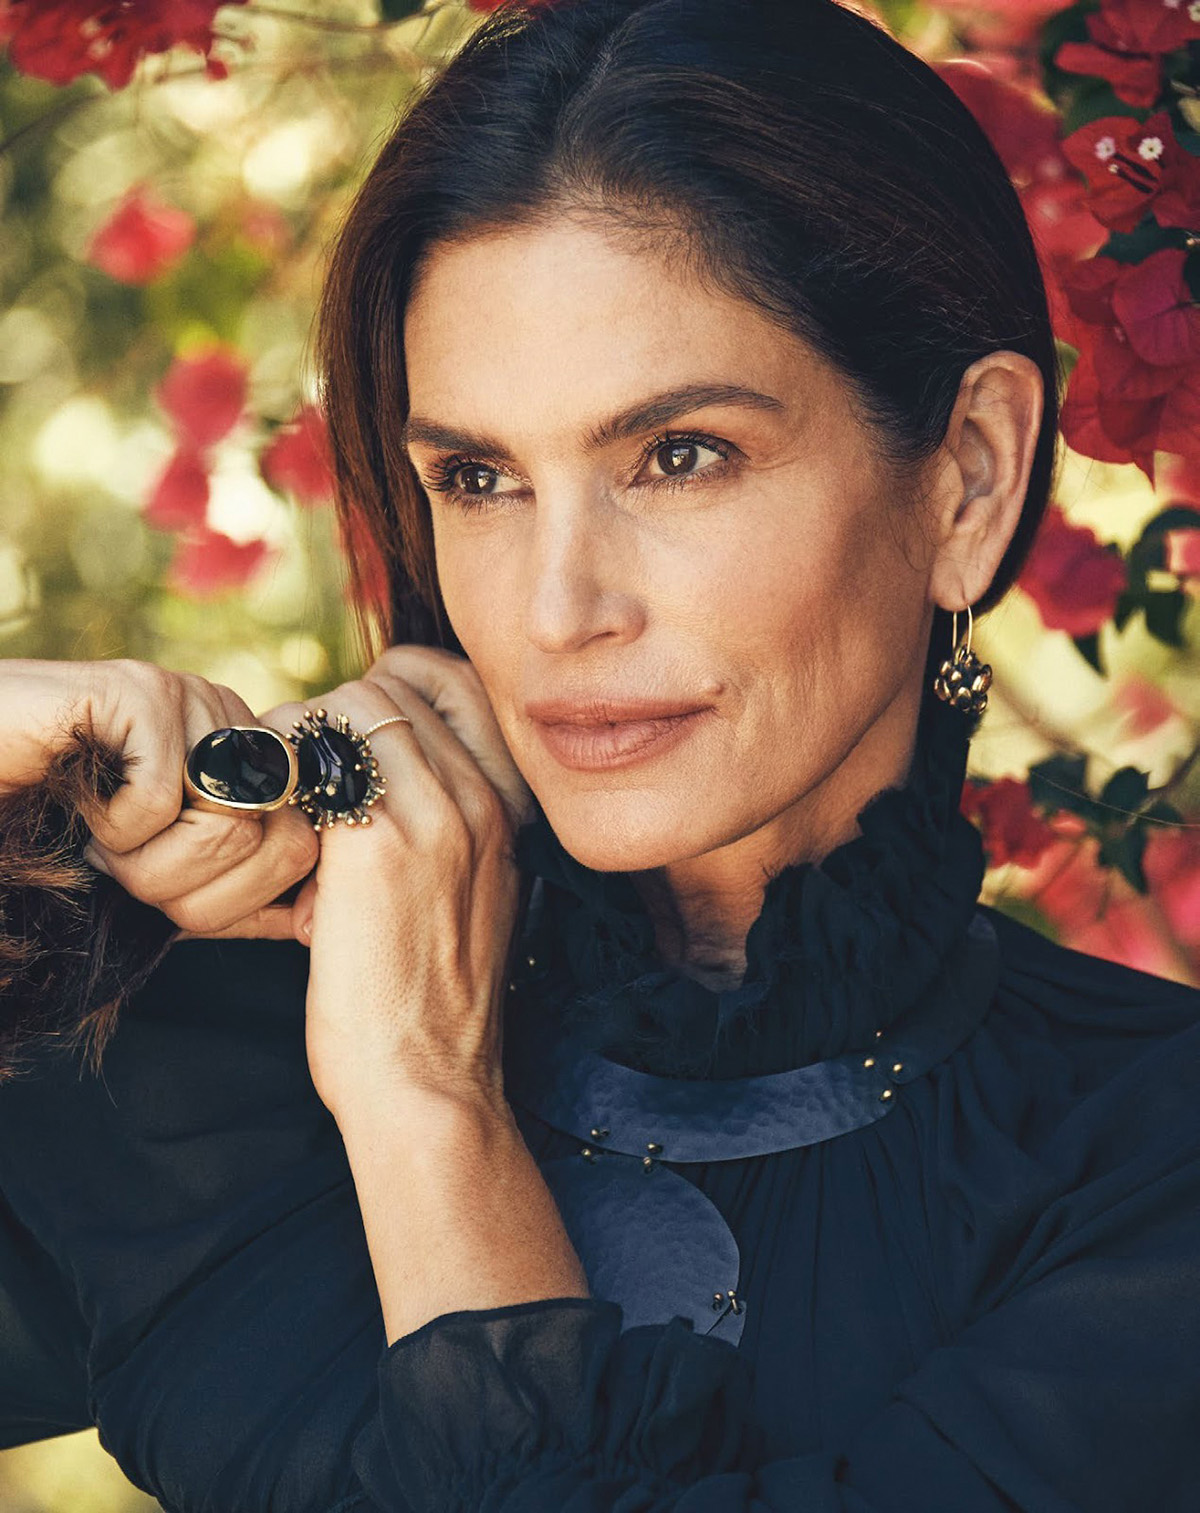 Cindy Crawford covers Tatler UK September 2021 by Victor Demarchelier